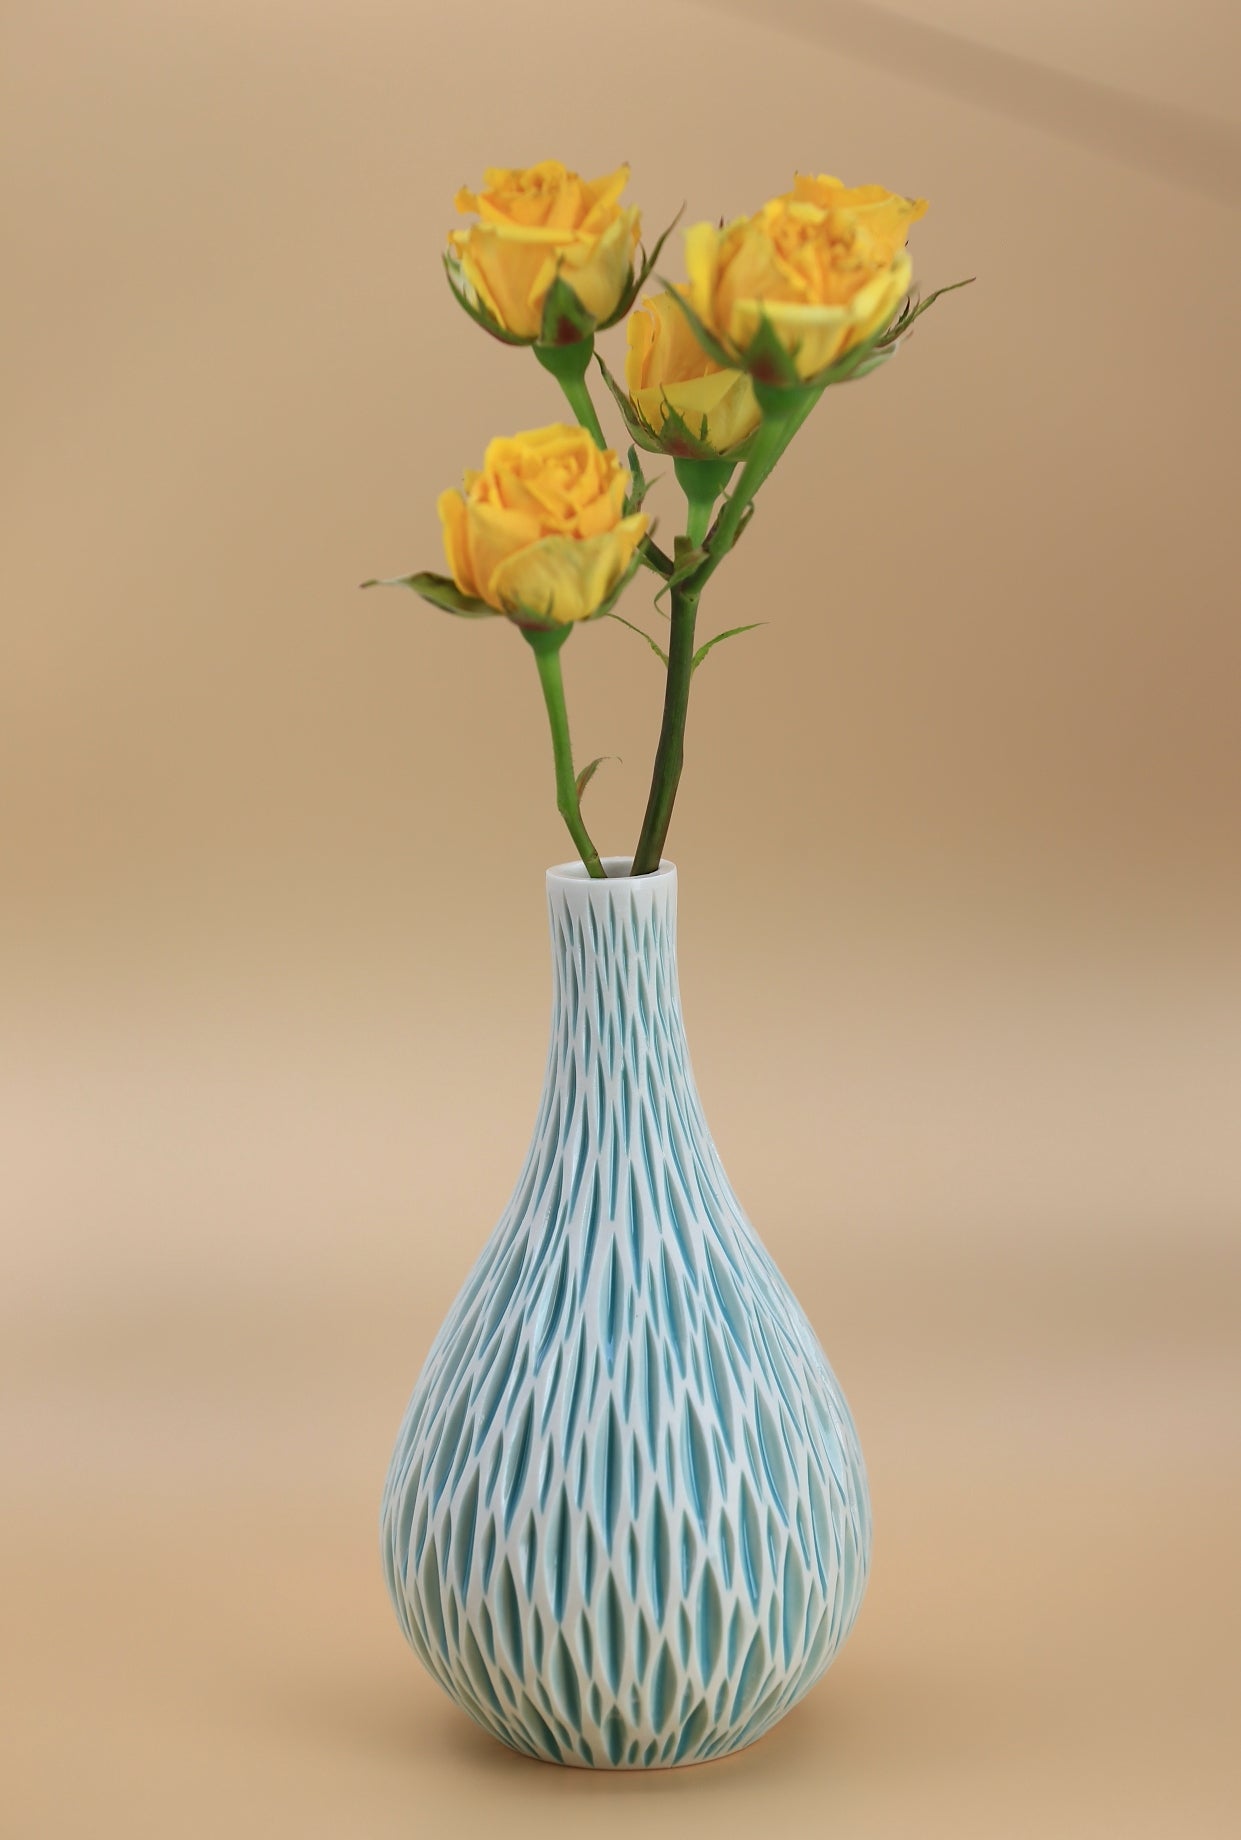 Tall porcelain bud vase with geometric carvings in turquoise white